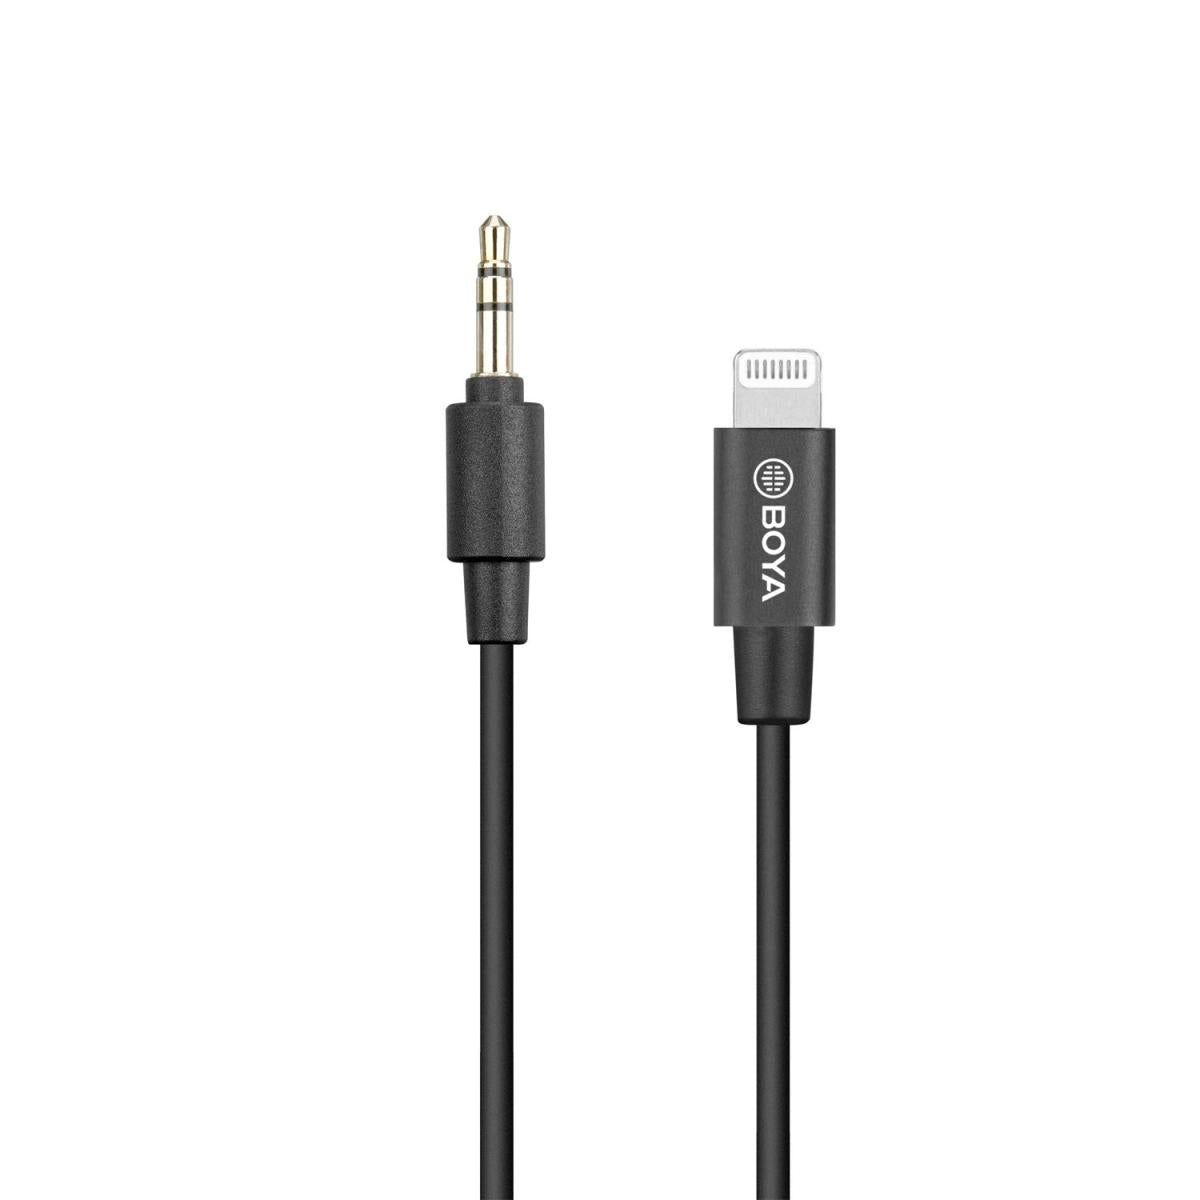 BOYA 3.5mm Male to Apple MFi Male Certified Lightning Adapter Cable (20cm) - Black